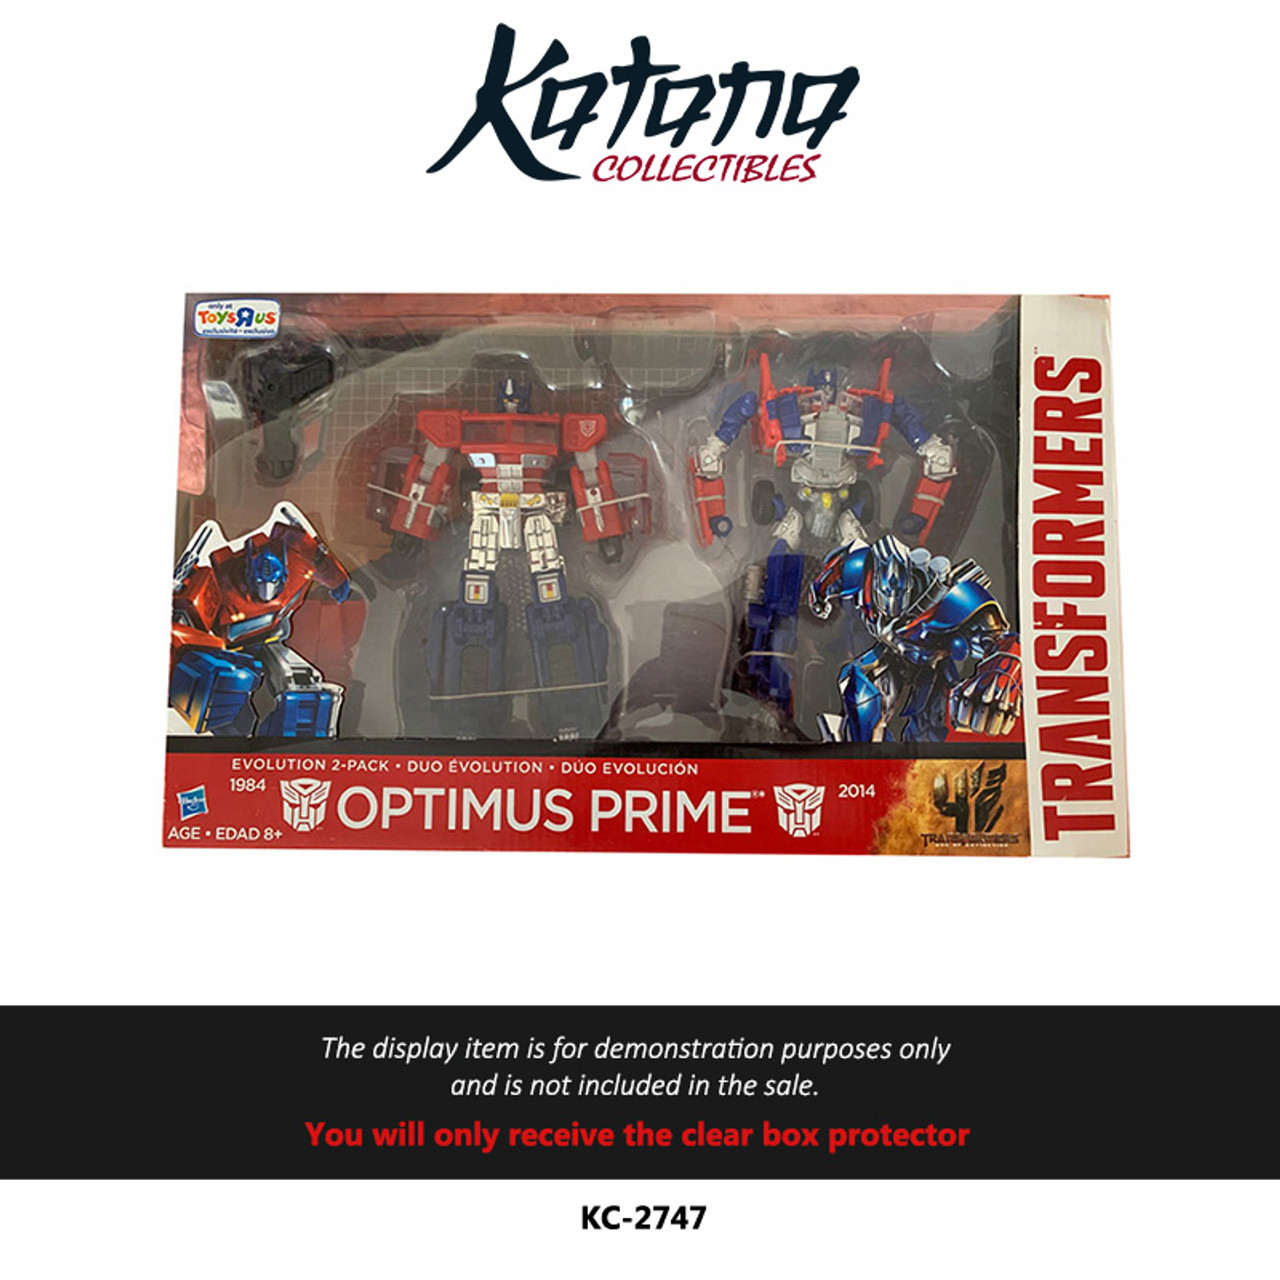 Katana Collectibles Protector For Transformers Evolution 2 Pack Optimus Prime1984 And 2014